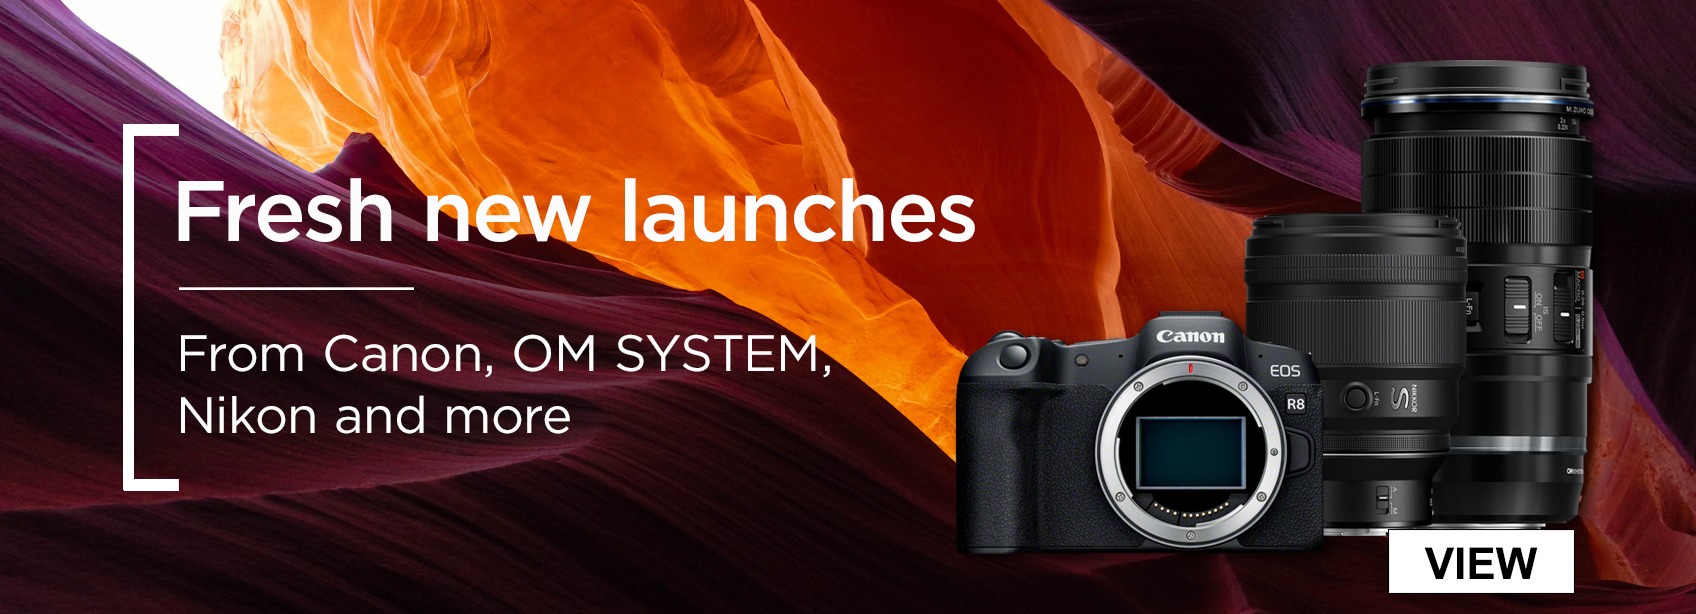 Fresh new launches from Canon, OM SYSTEM, Nikon and more